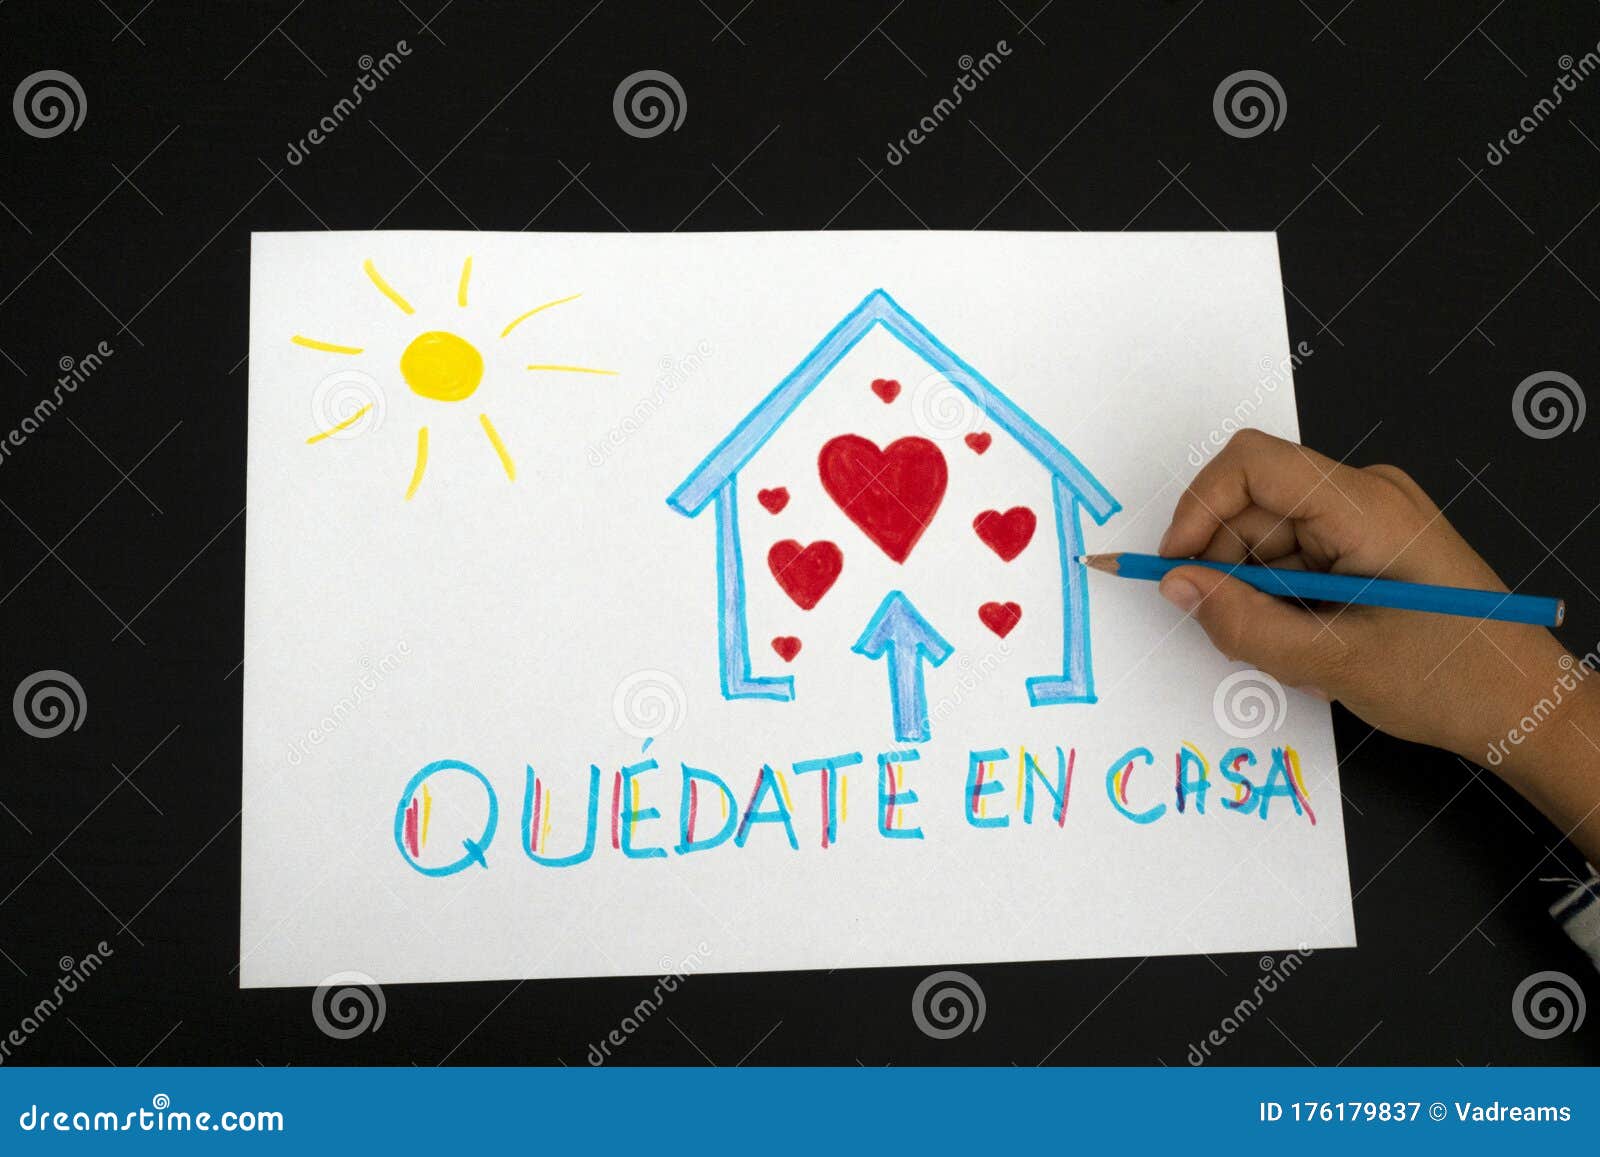 quarantine in spain. kid hand draw picture with spanish words quedate en casa - stay at home